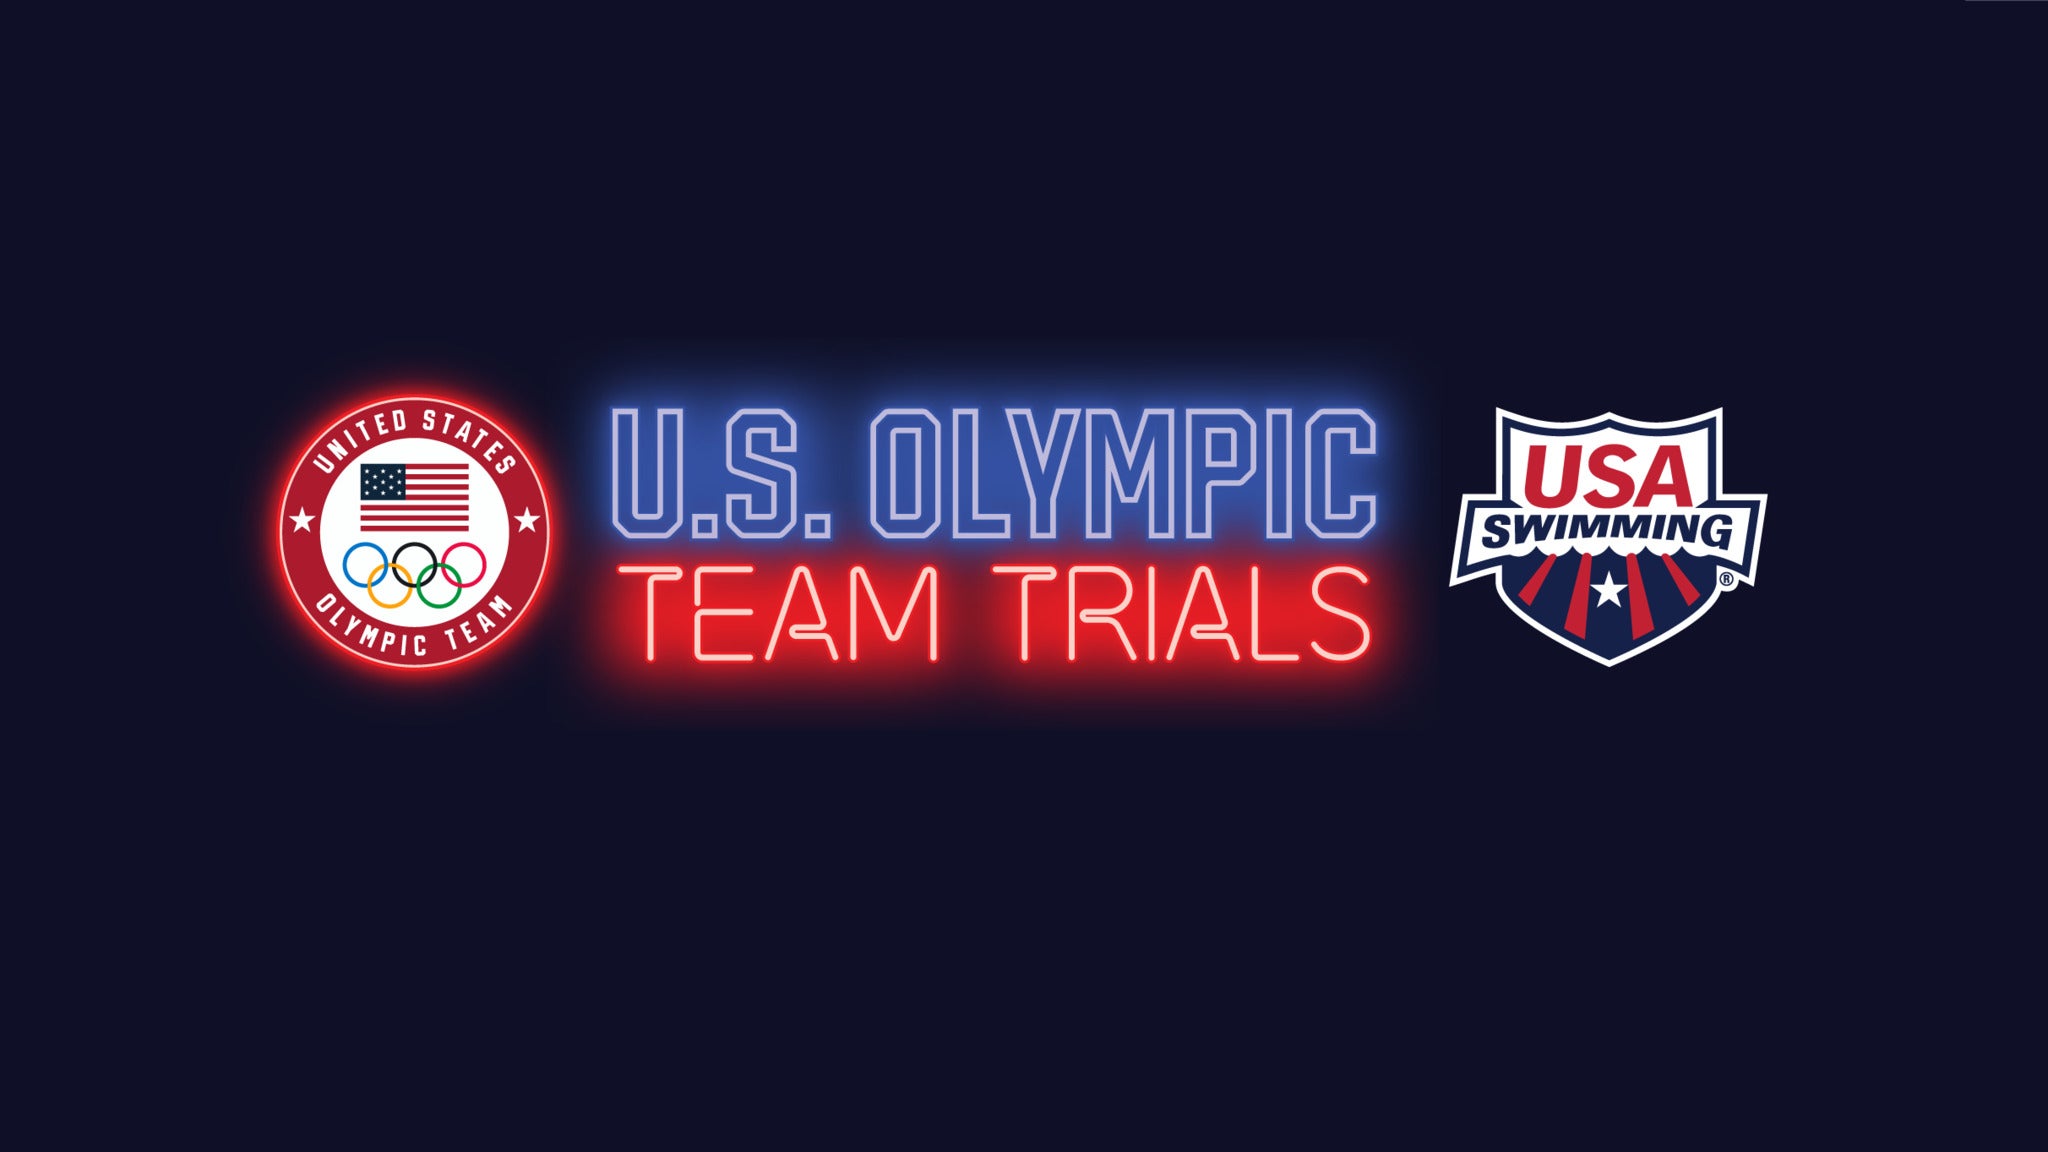 Day 3 Package: U.S. Olympic Team Trials - Swimming in Omaha promo photo for Past Purchase presale offer code